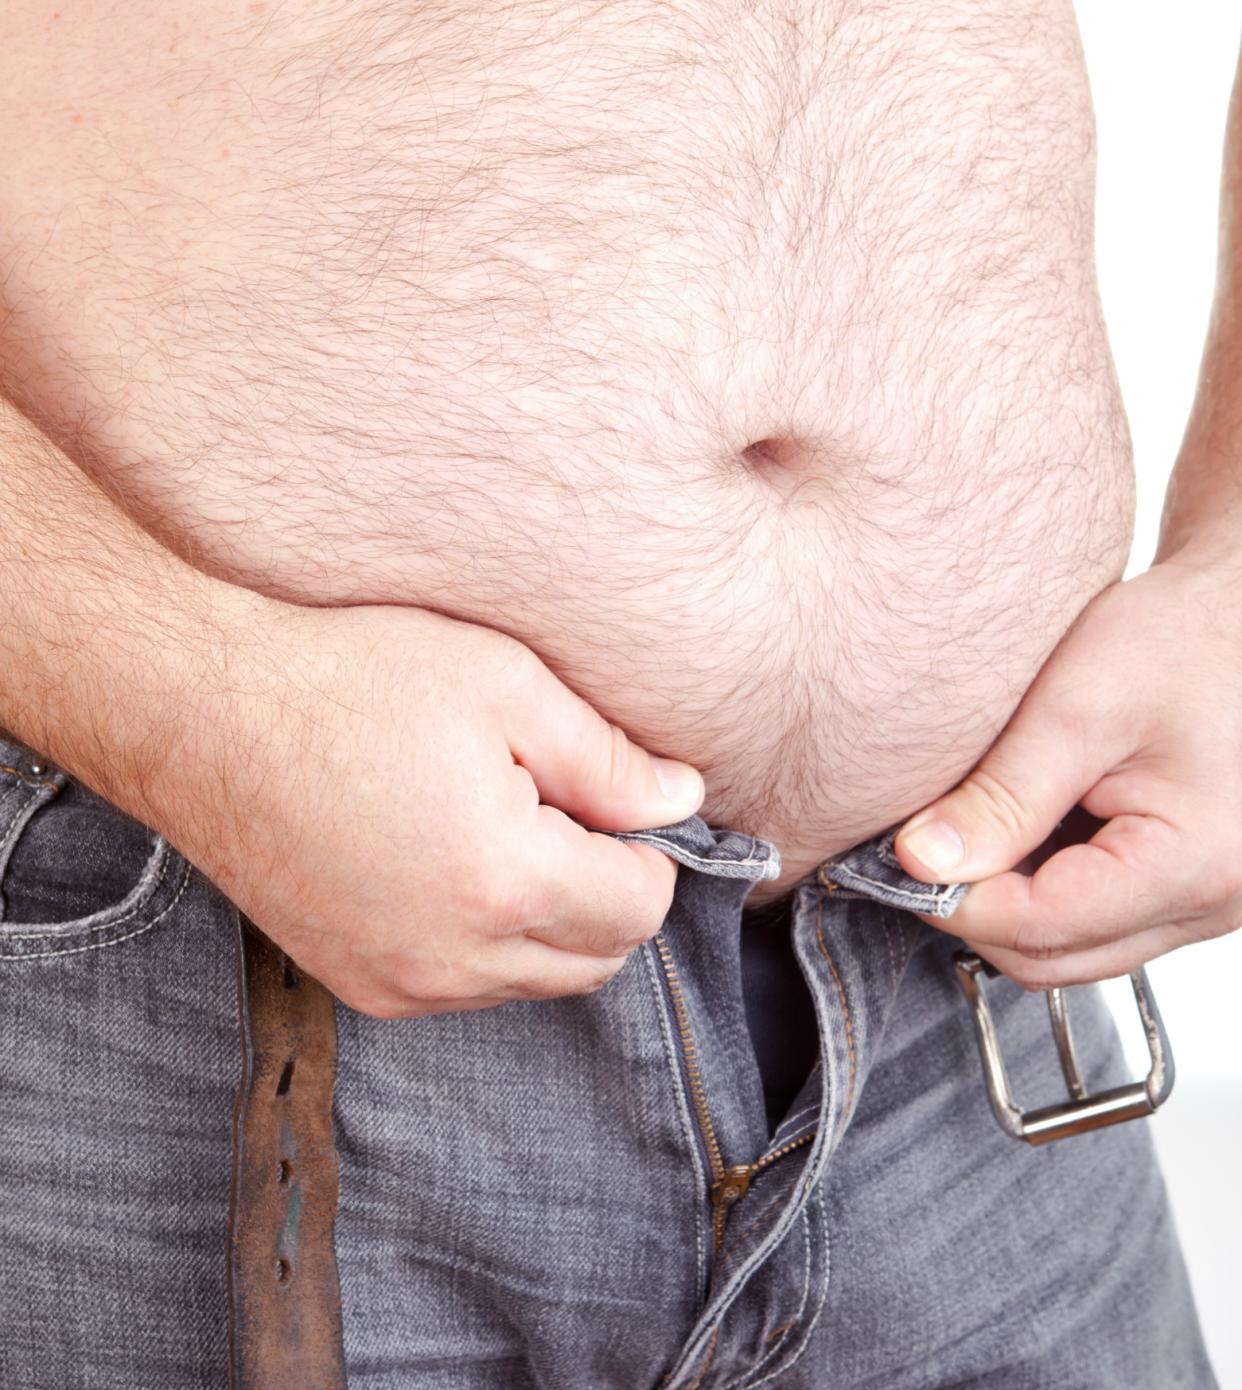 The dad bod has rediscovered its sex appeal. Photo: Getty Images